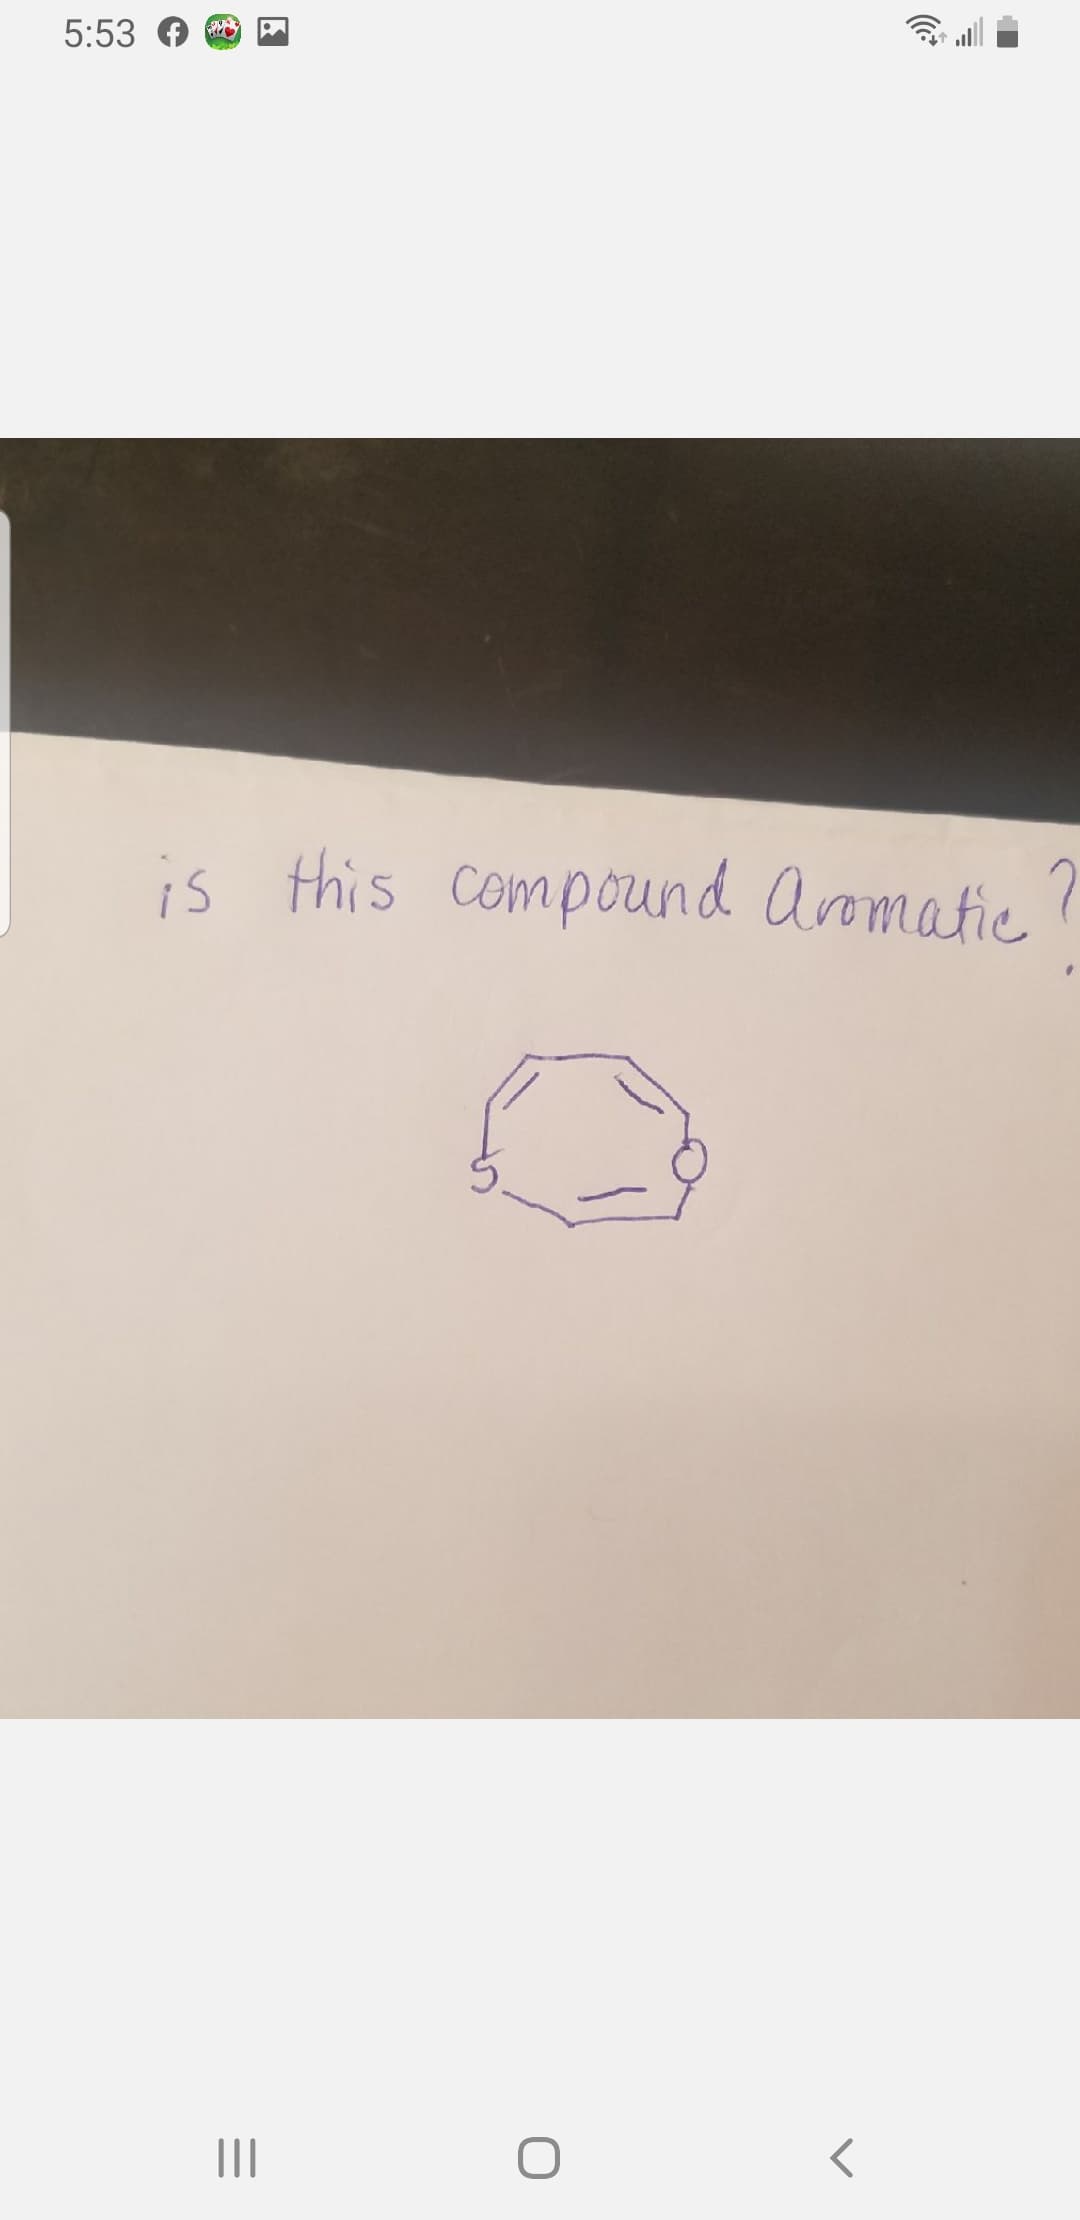 5:53
is this Compound Aromatie
II
